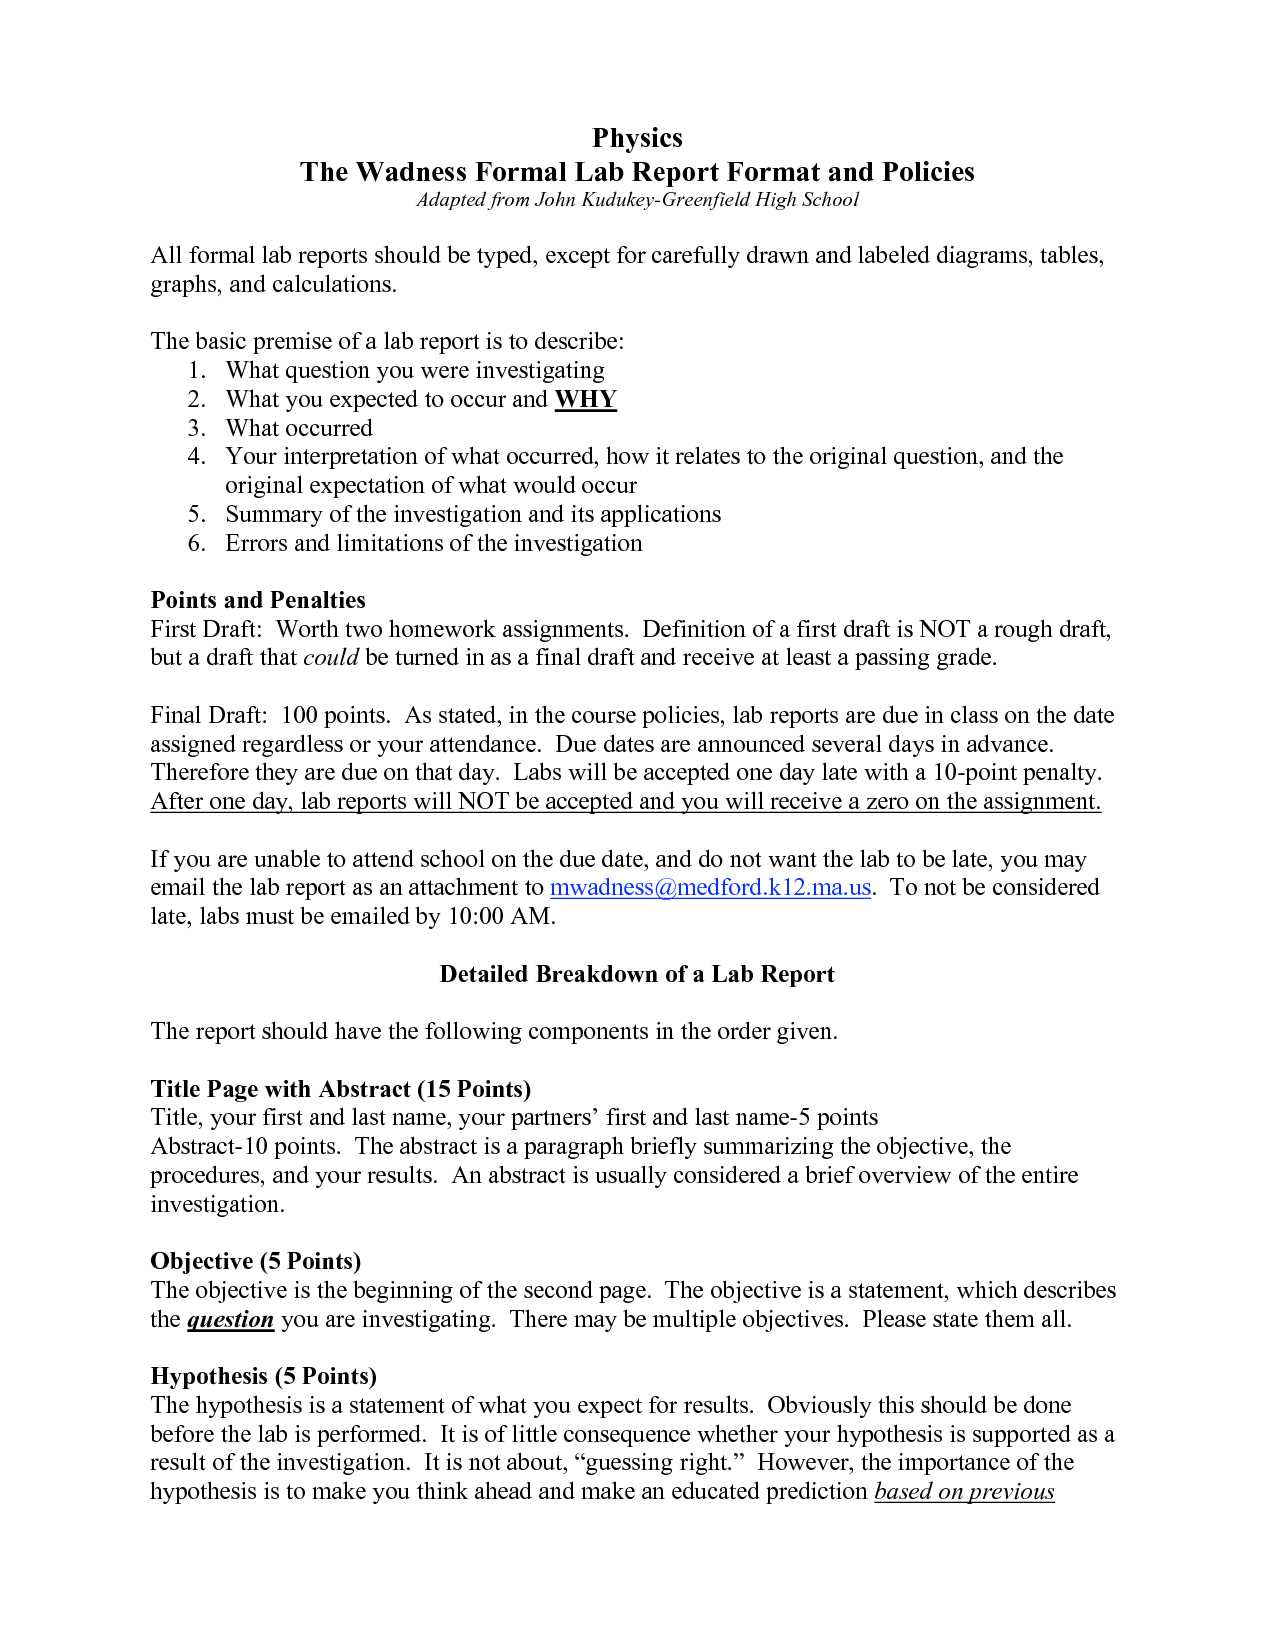 Formal Lab Report Template Physics : Biological Science For Science Lab Report Template